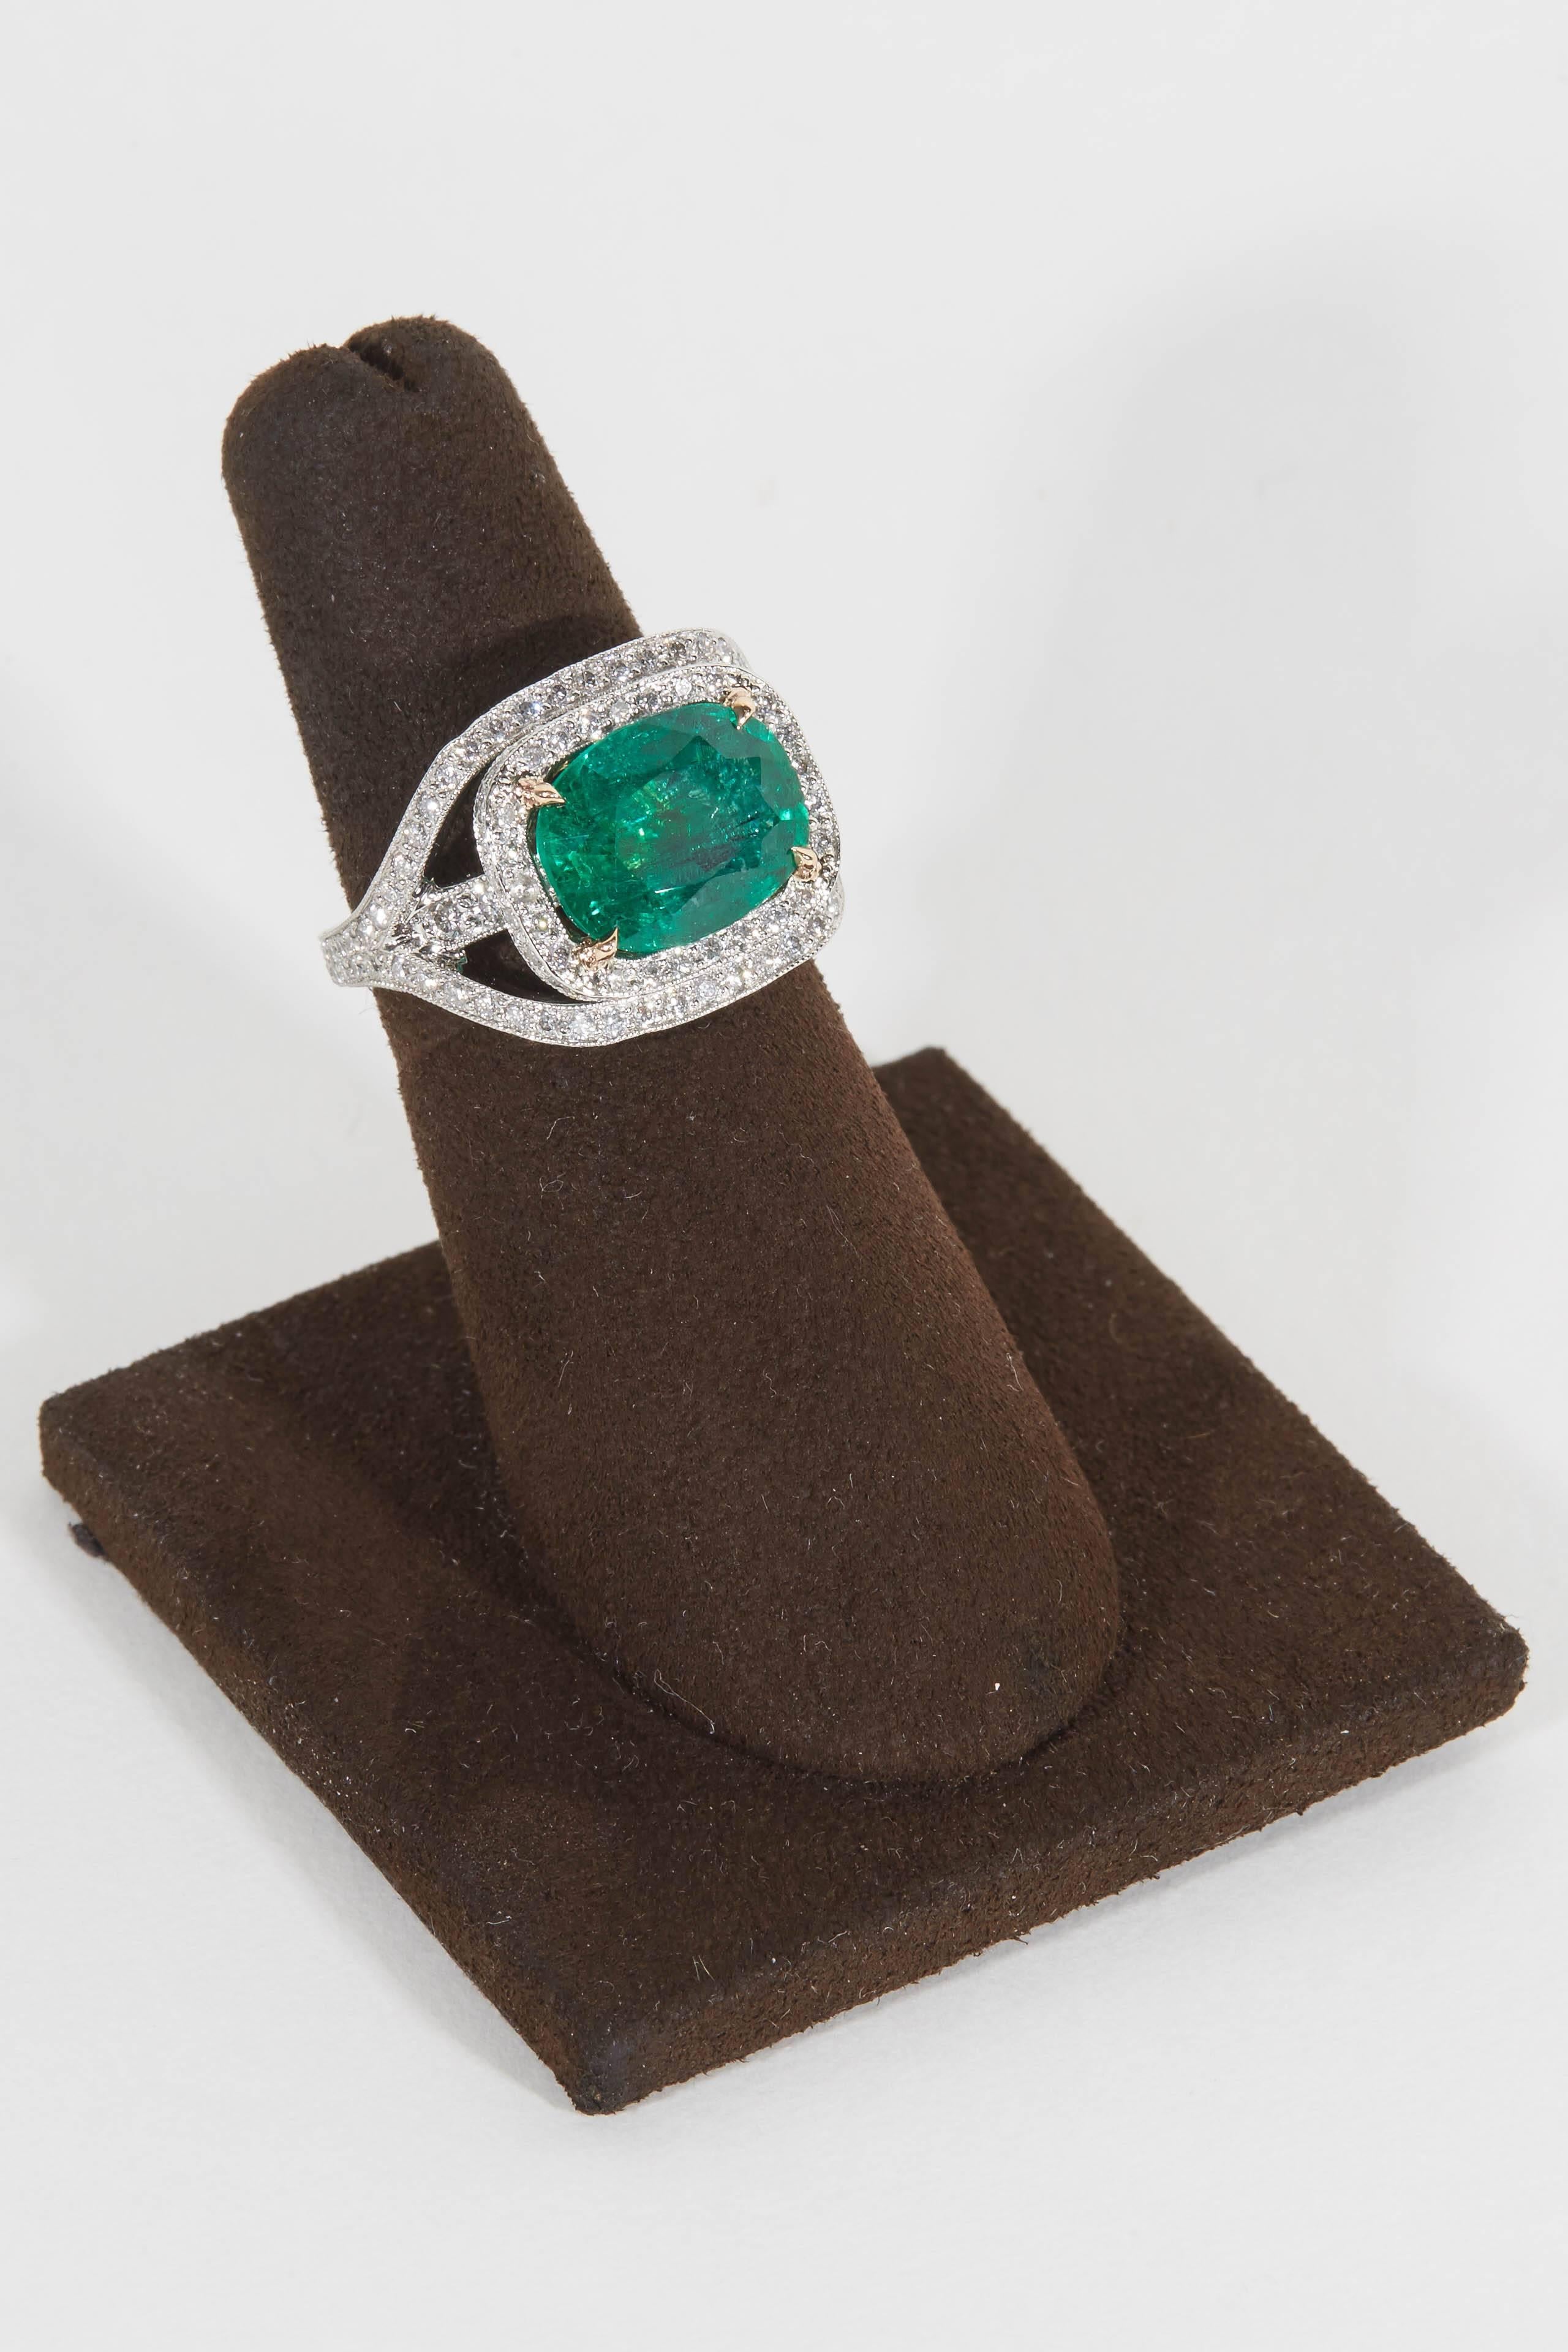 Cushion Cut Emerald and Diamond Ring For Sale